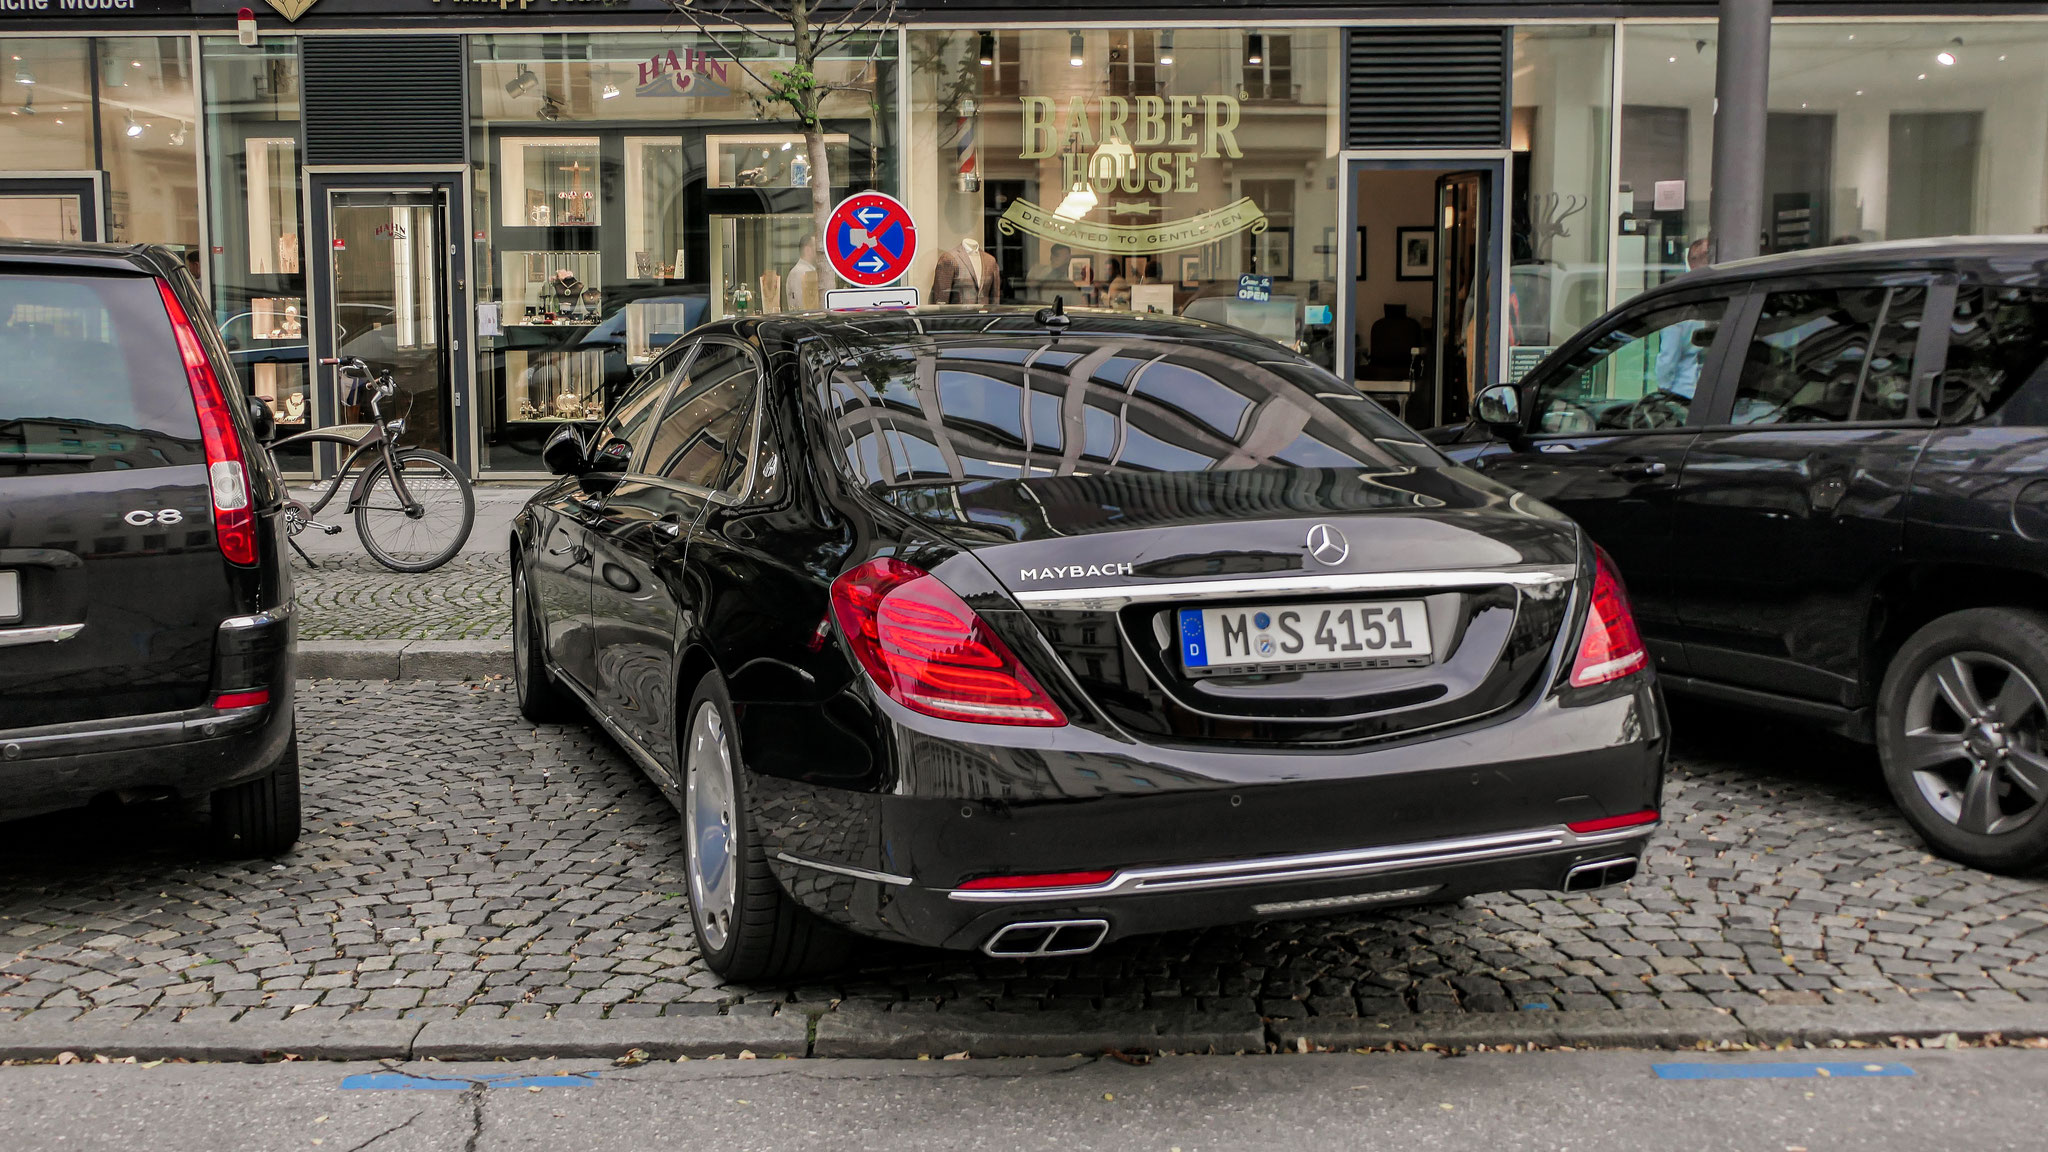 Mercedes Maybach S560 - M-S4151